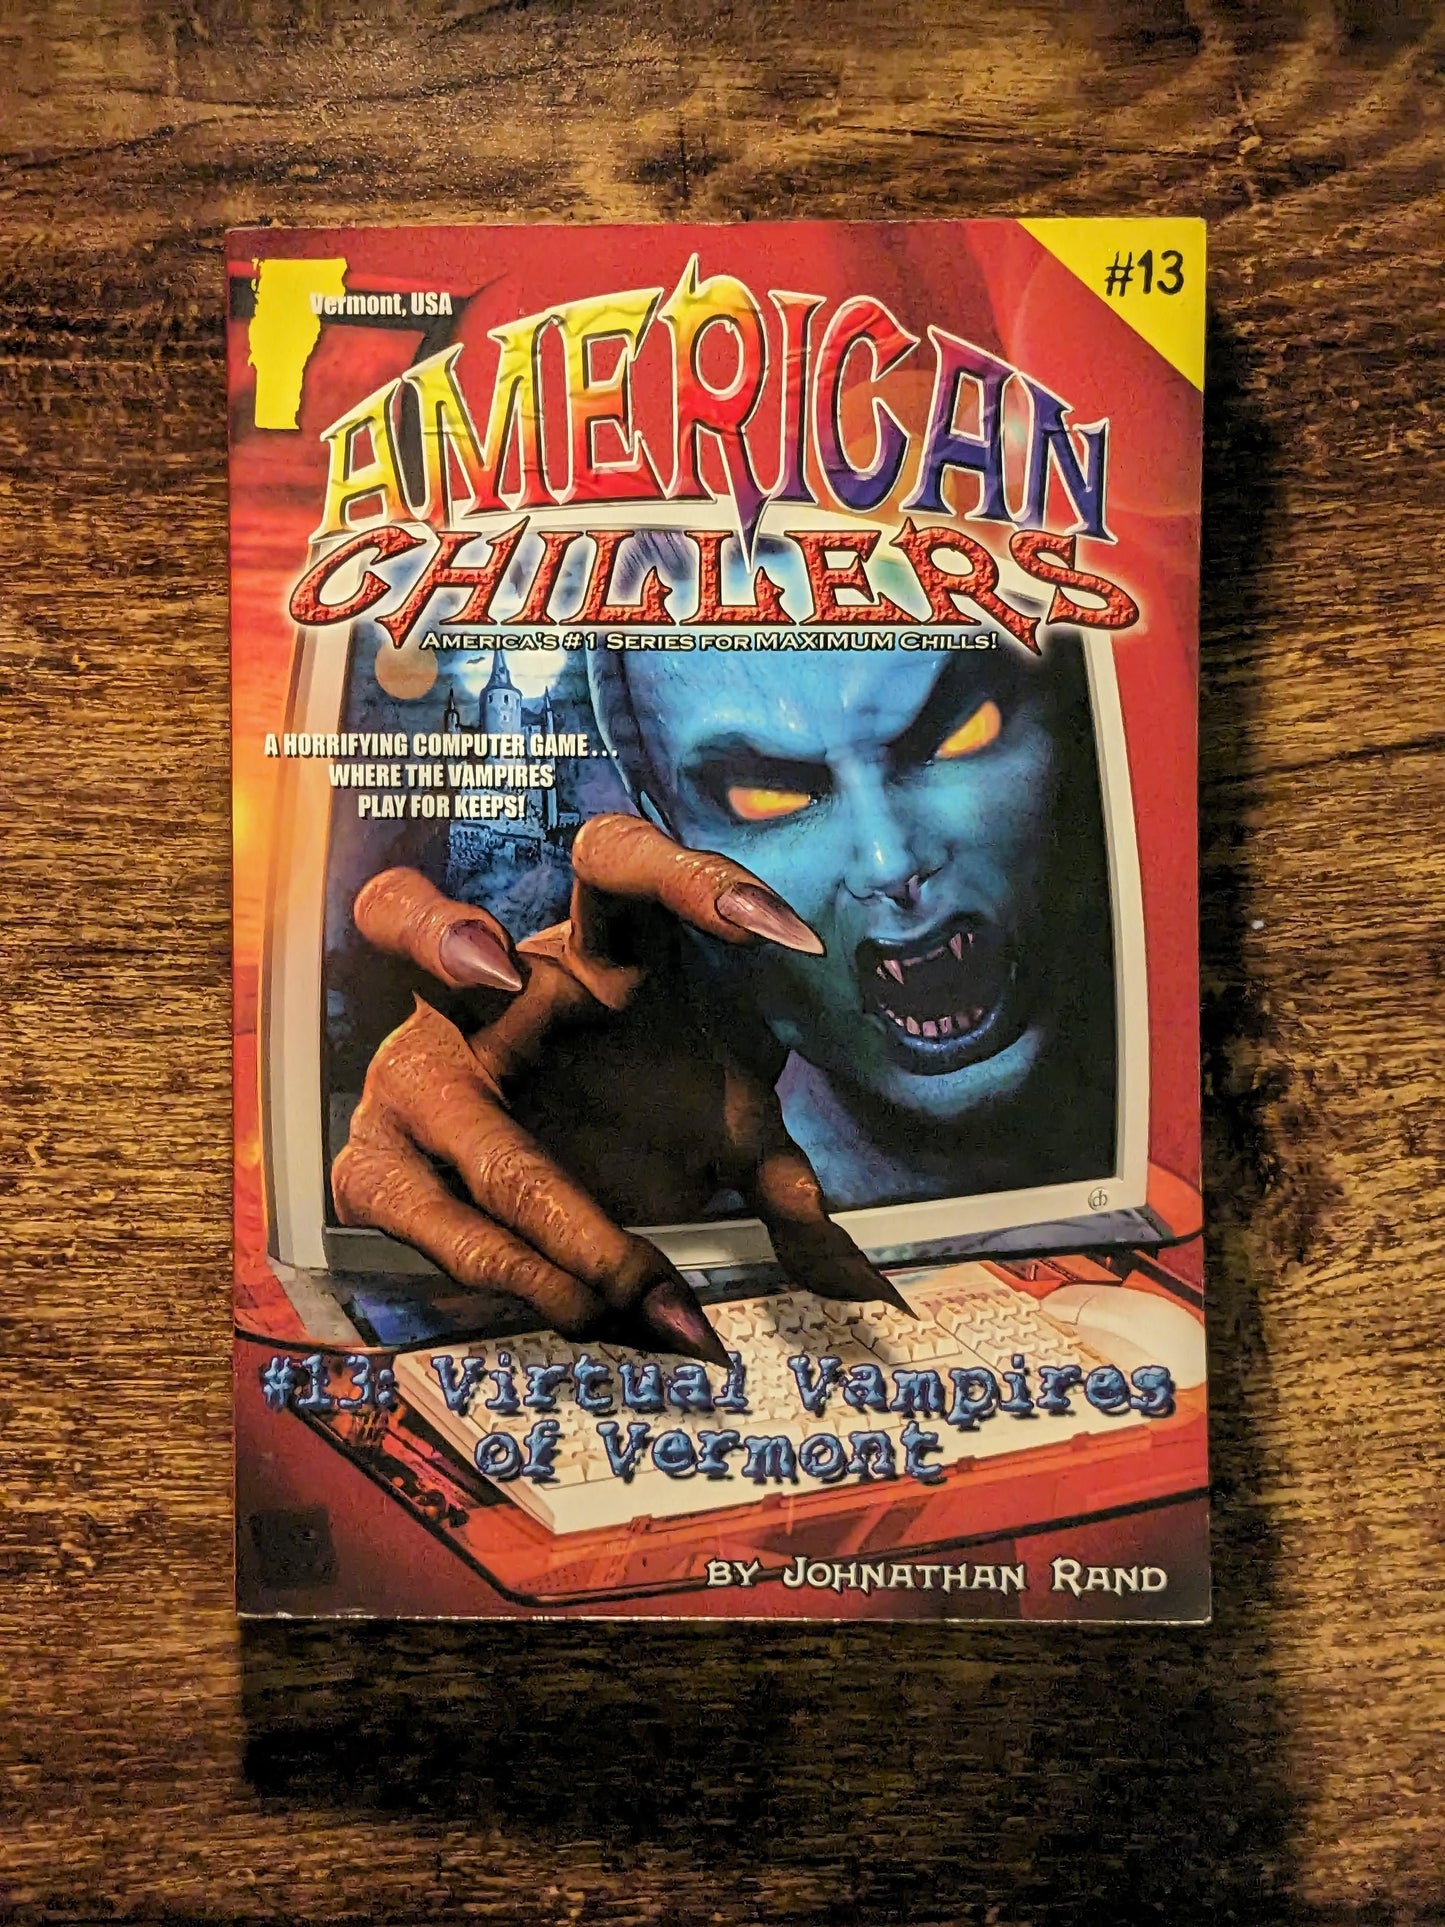 Virtual Vampires of Vermont (American Chillers) by Johnathan Rand - Asylum Books